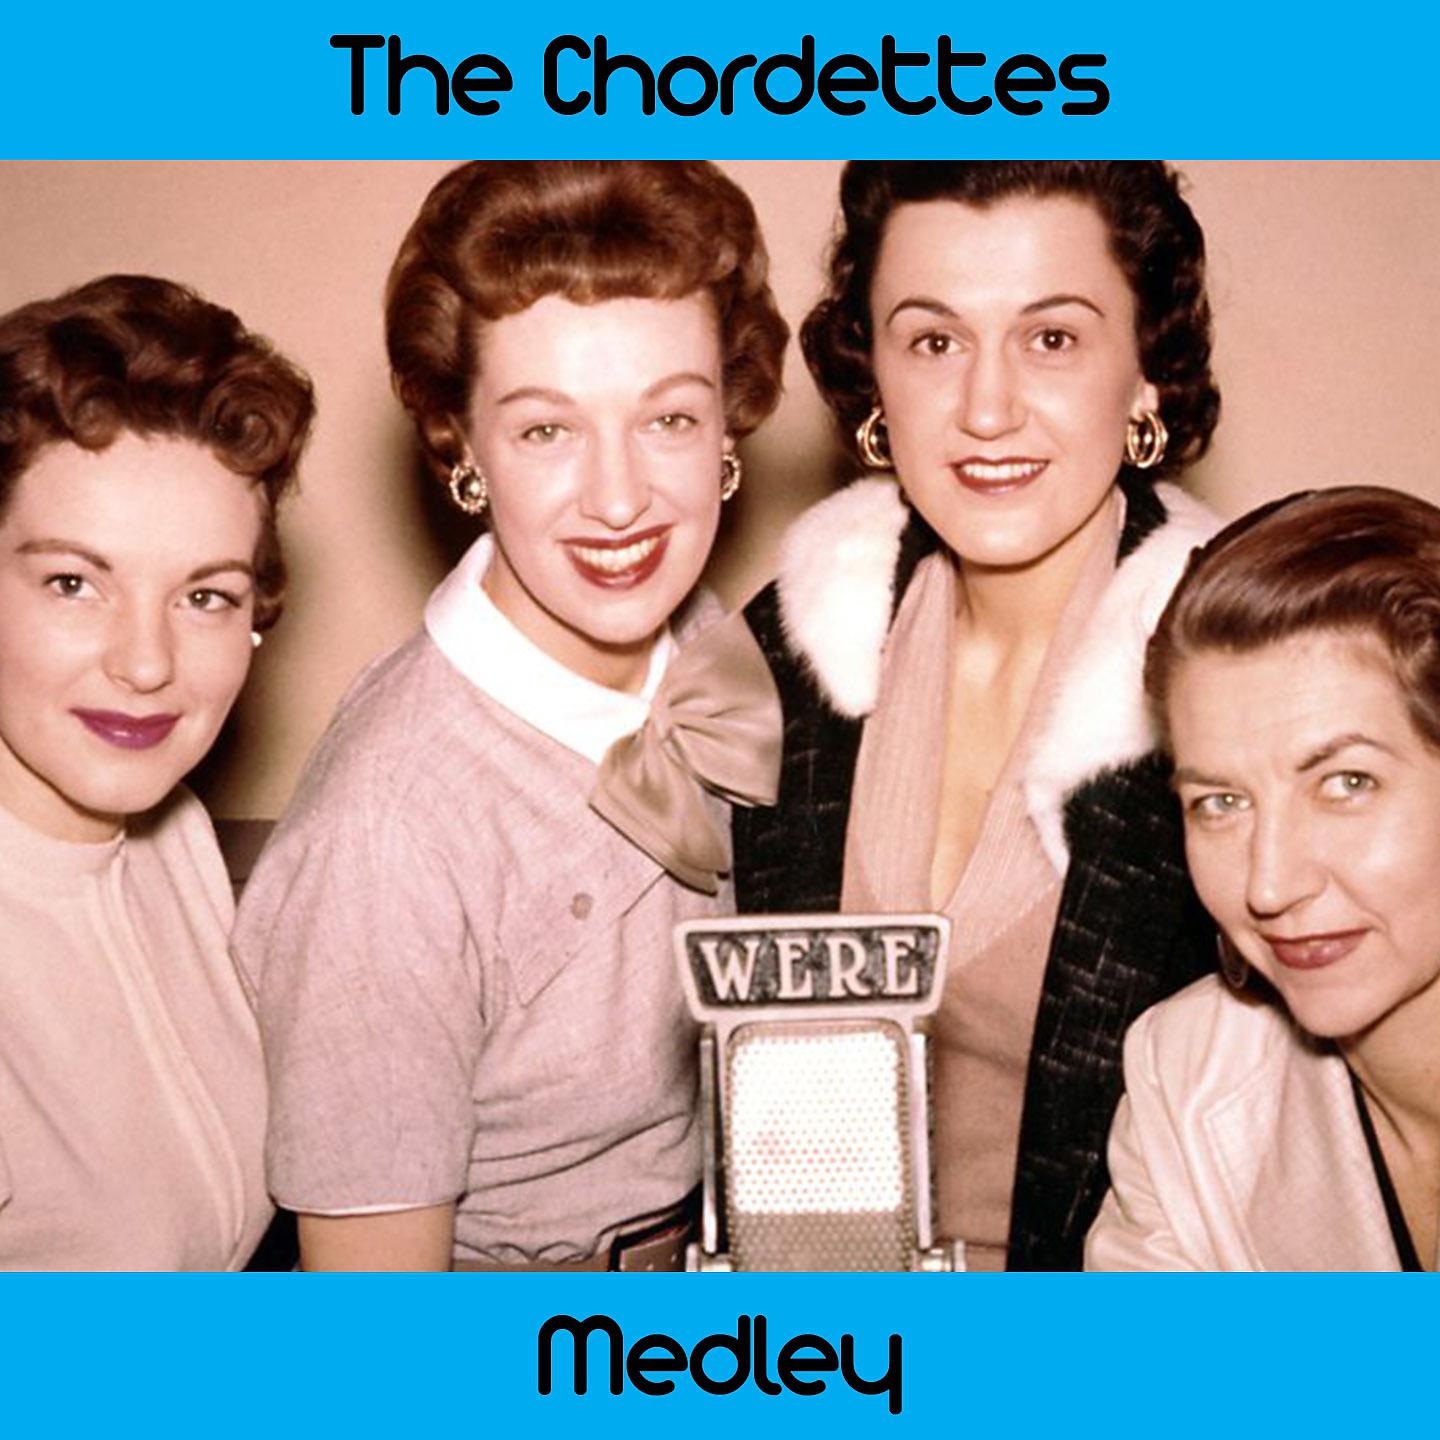 Постер альбома The Chordettes Medley: Mr. Sandman / Eddie My Love / Born to Be with You / Soft Sands / Come Home to My Arms / Echo of Love / Just Between You and Me / Teen Age Goodnight / Humming Bird / Like a Baby / Lay Down Your Arms / Love Never Changes